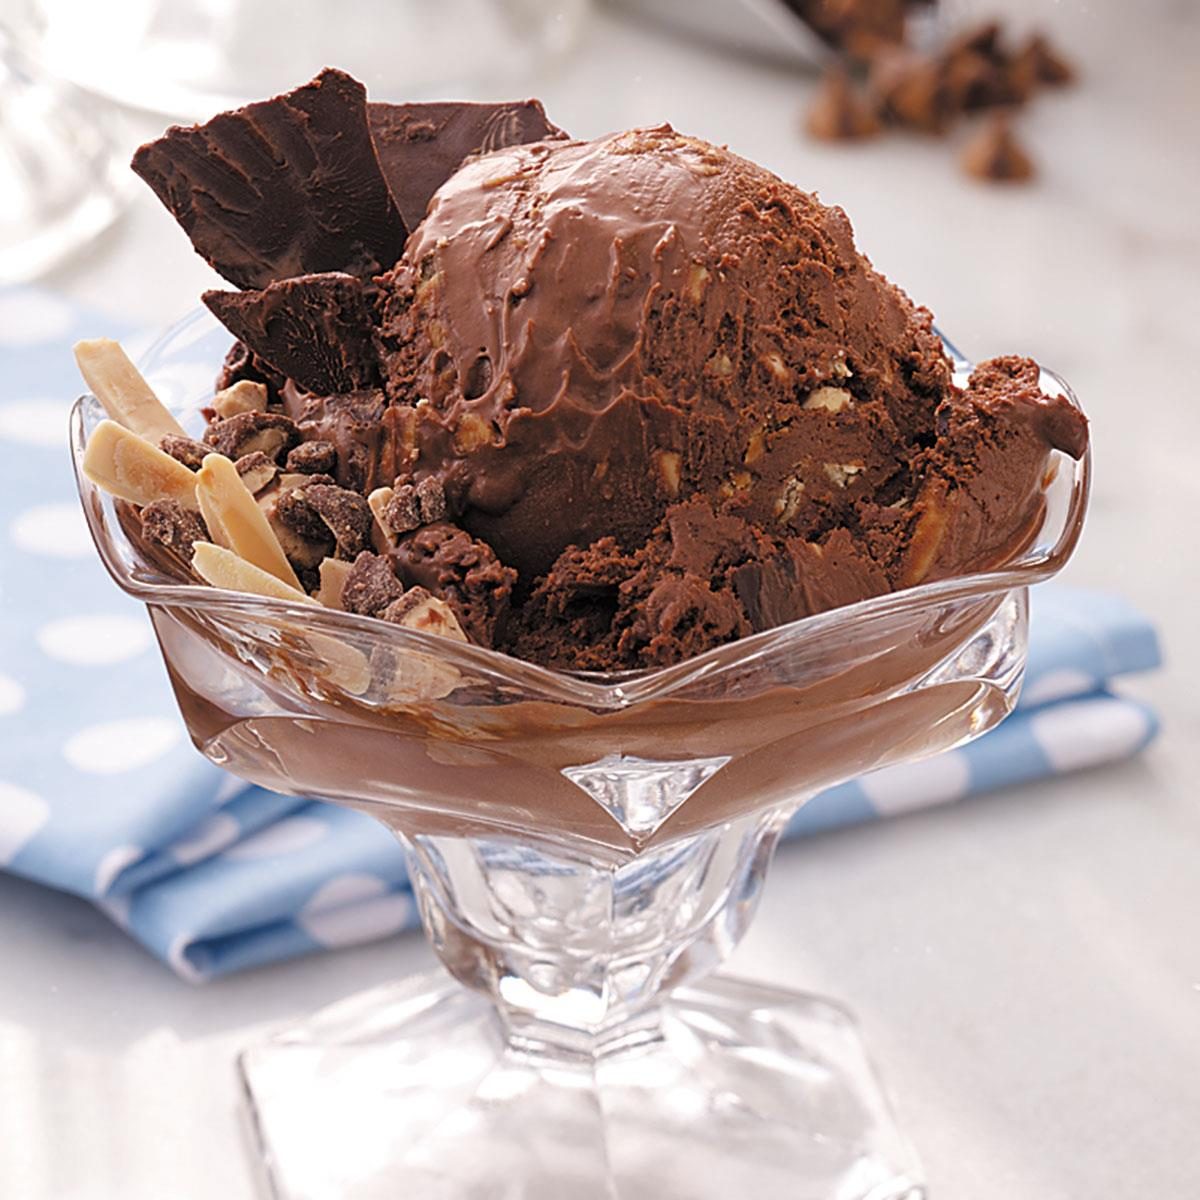 https://www.tasteofhome.com/wp-content/uploads/2018/01/Chocolate-Crunch-Ice-Cream_exps31814_CW950599D43C_RMS.jpg